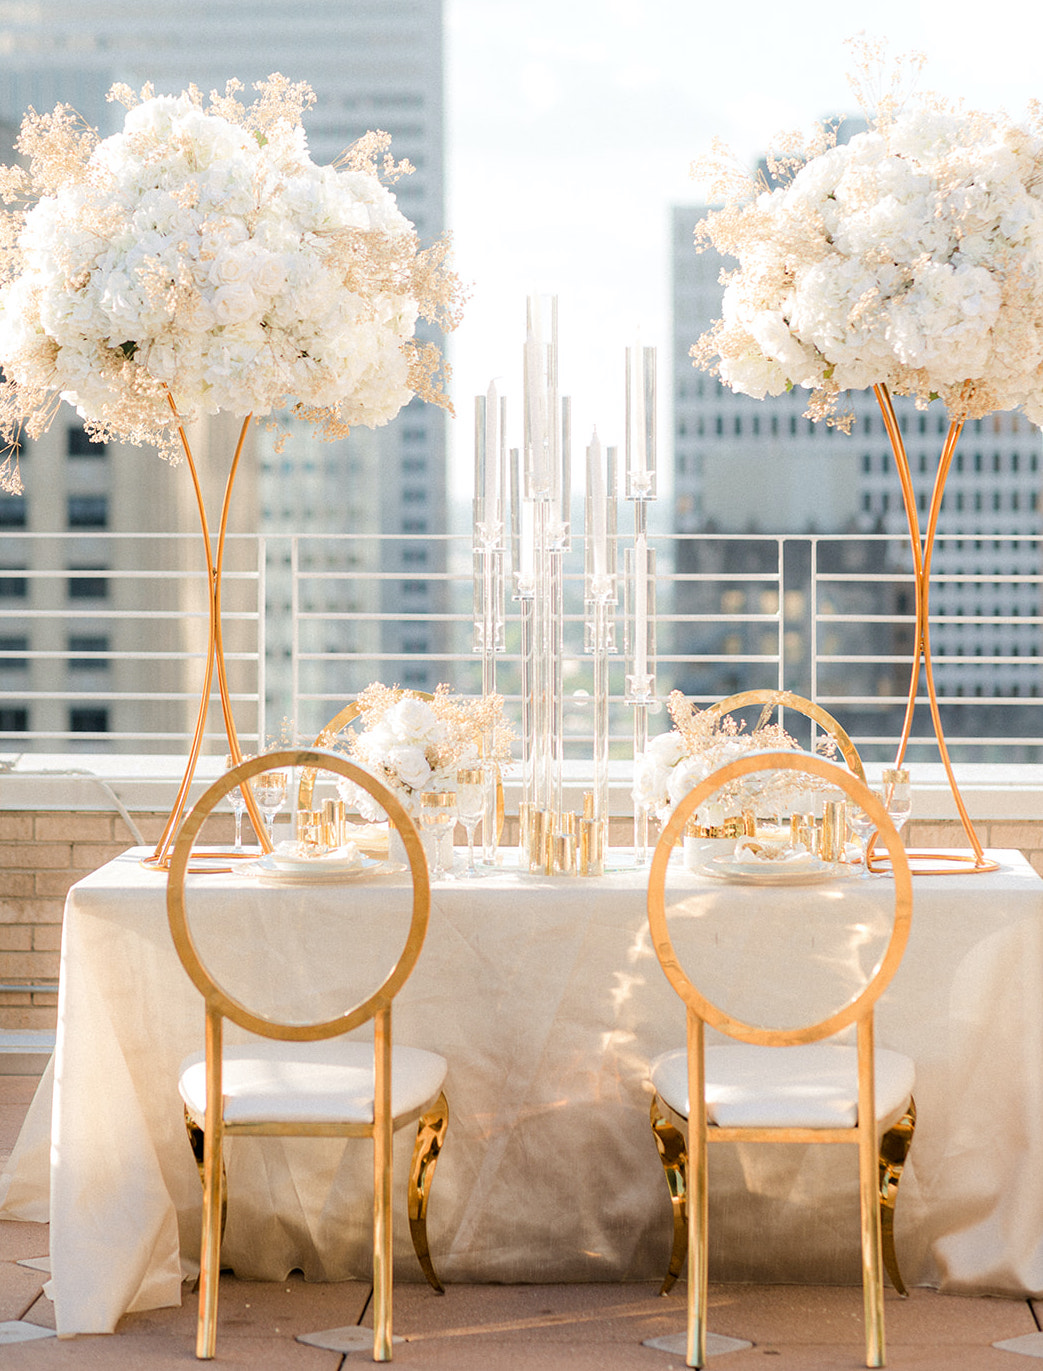 The sunlight reflects off of the gold chairs and dinner table used for the ethereal rooftop wedding styled shoot.